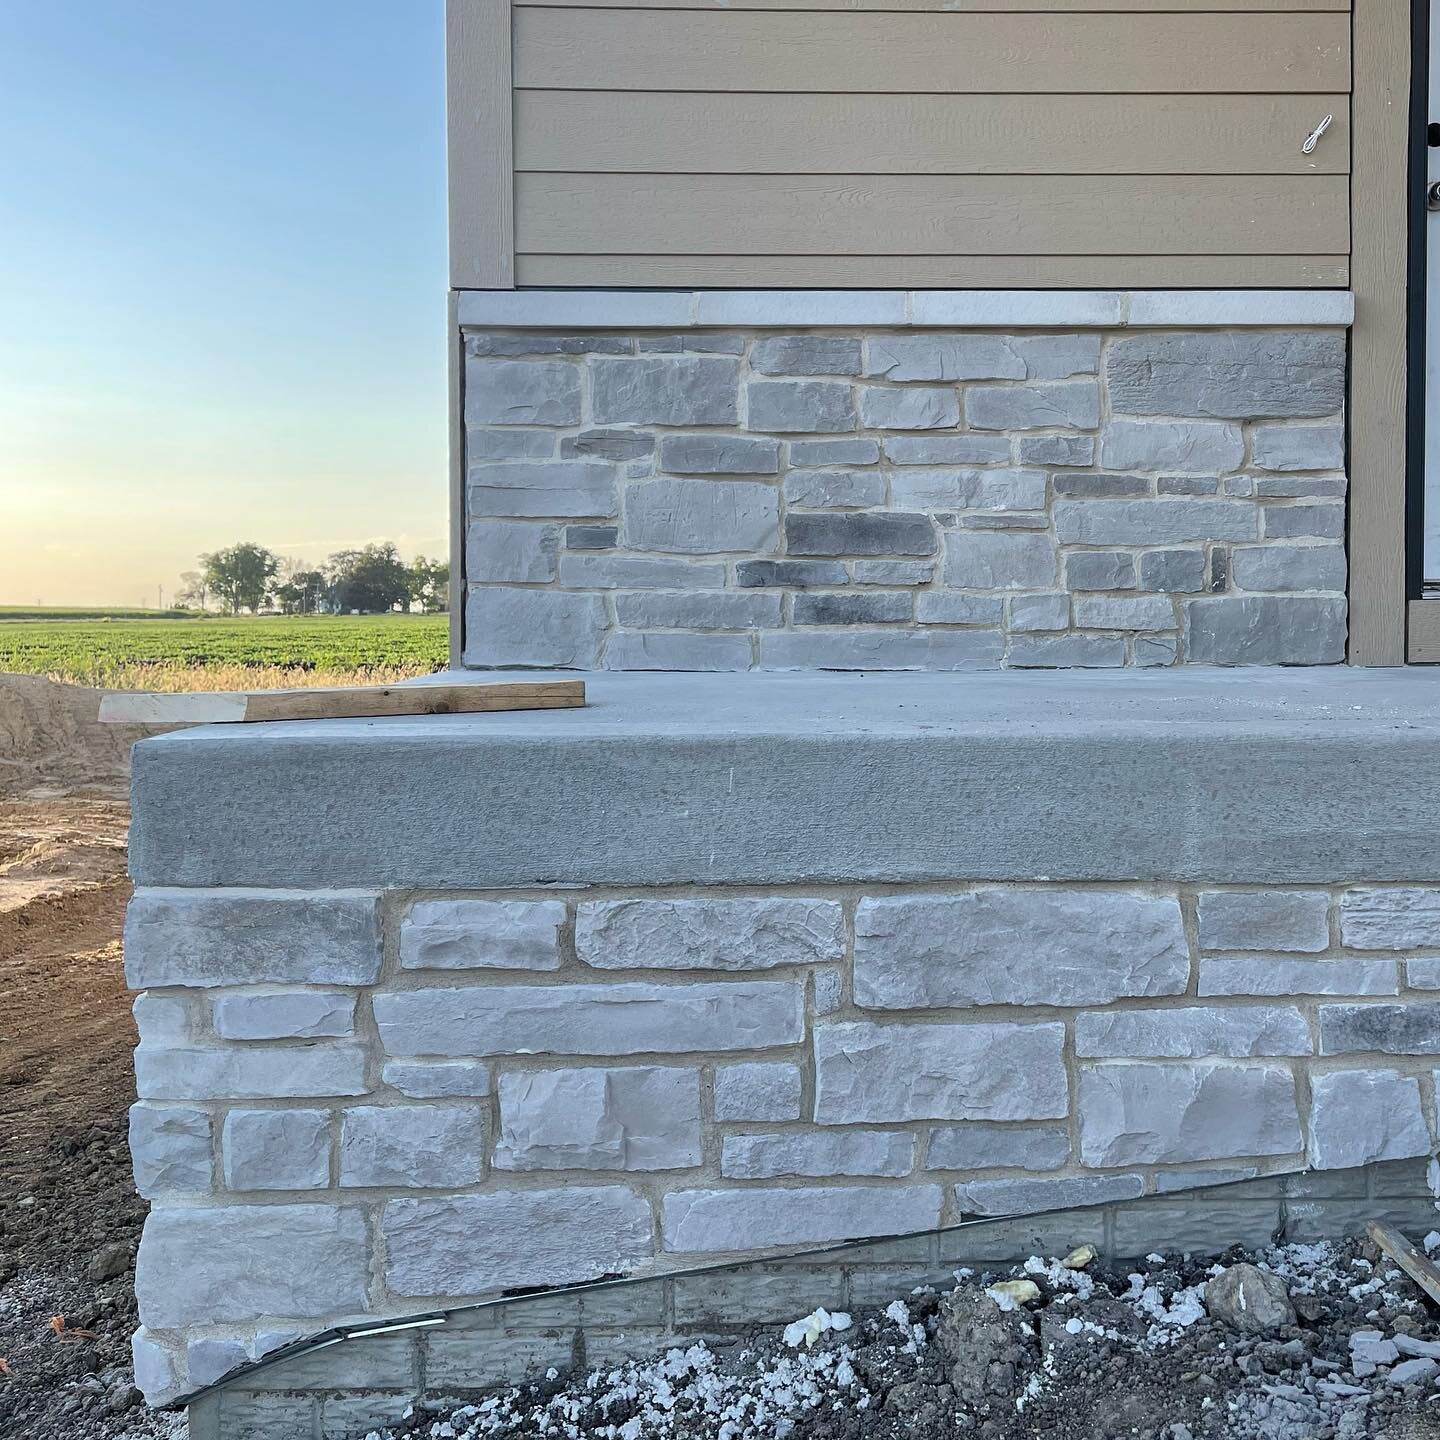 The stone and grout are complete at our #cooperbuild (our 2-story Cooper Plan) and our #clairebuild (our ranch style Claire Plan). 
.
Our pick for the stone on both builds is an instant classic, Winter Ledge Point stone by @dutchqualitystone with whi